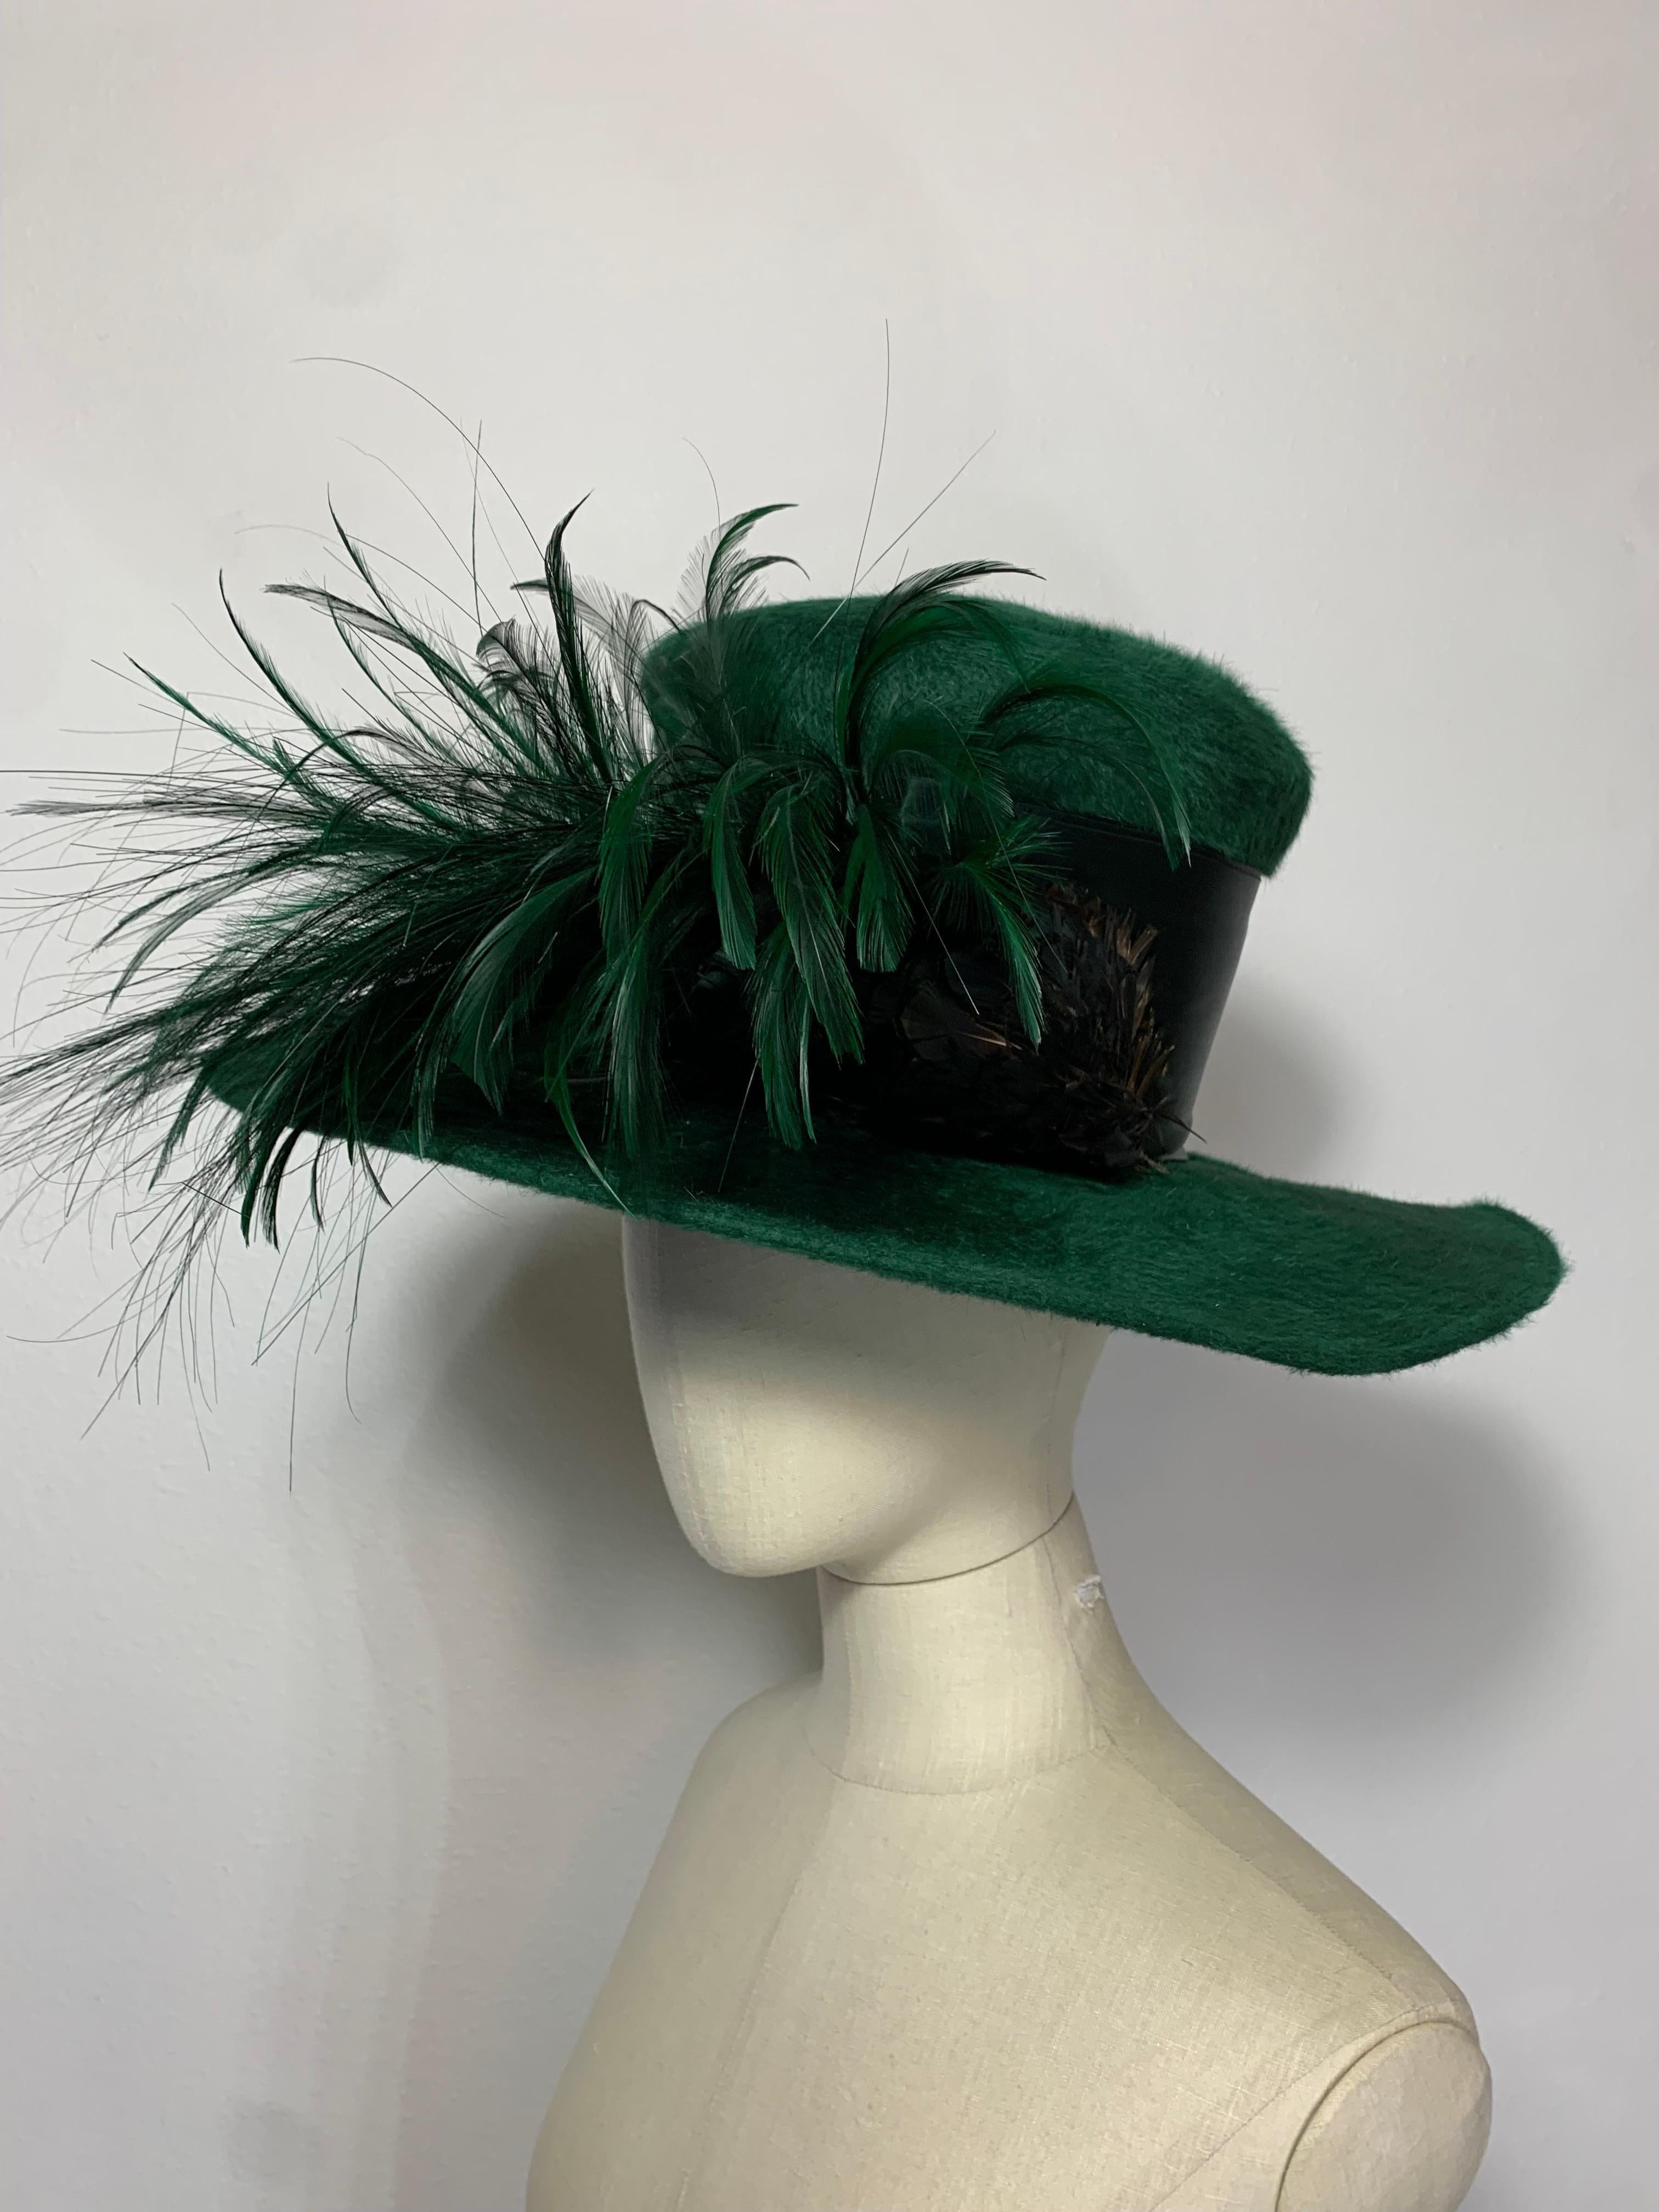 Maison Michel Autumn/Winter Medium Brim Forest Green Fur Felt  Beautifully Blocked High Top Hat with Matching Hackle Feather Pouf and Wide Grosgrain Band: Unlabeled, with attached combs for securing. Size 7 Medium. Made in France. 

Please visit our